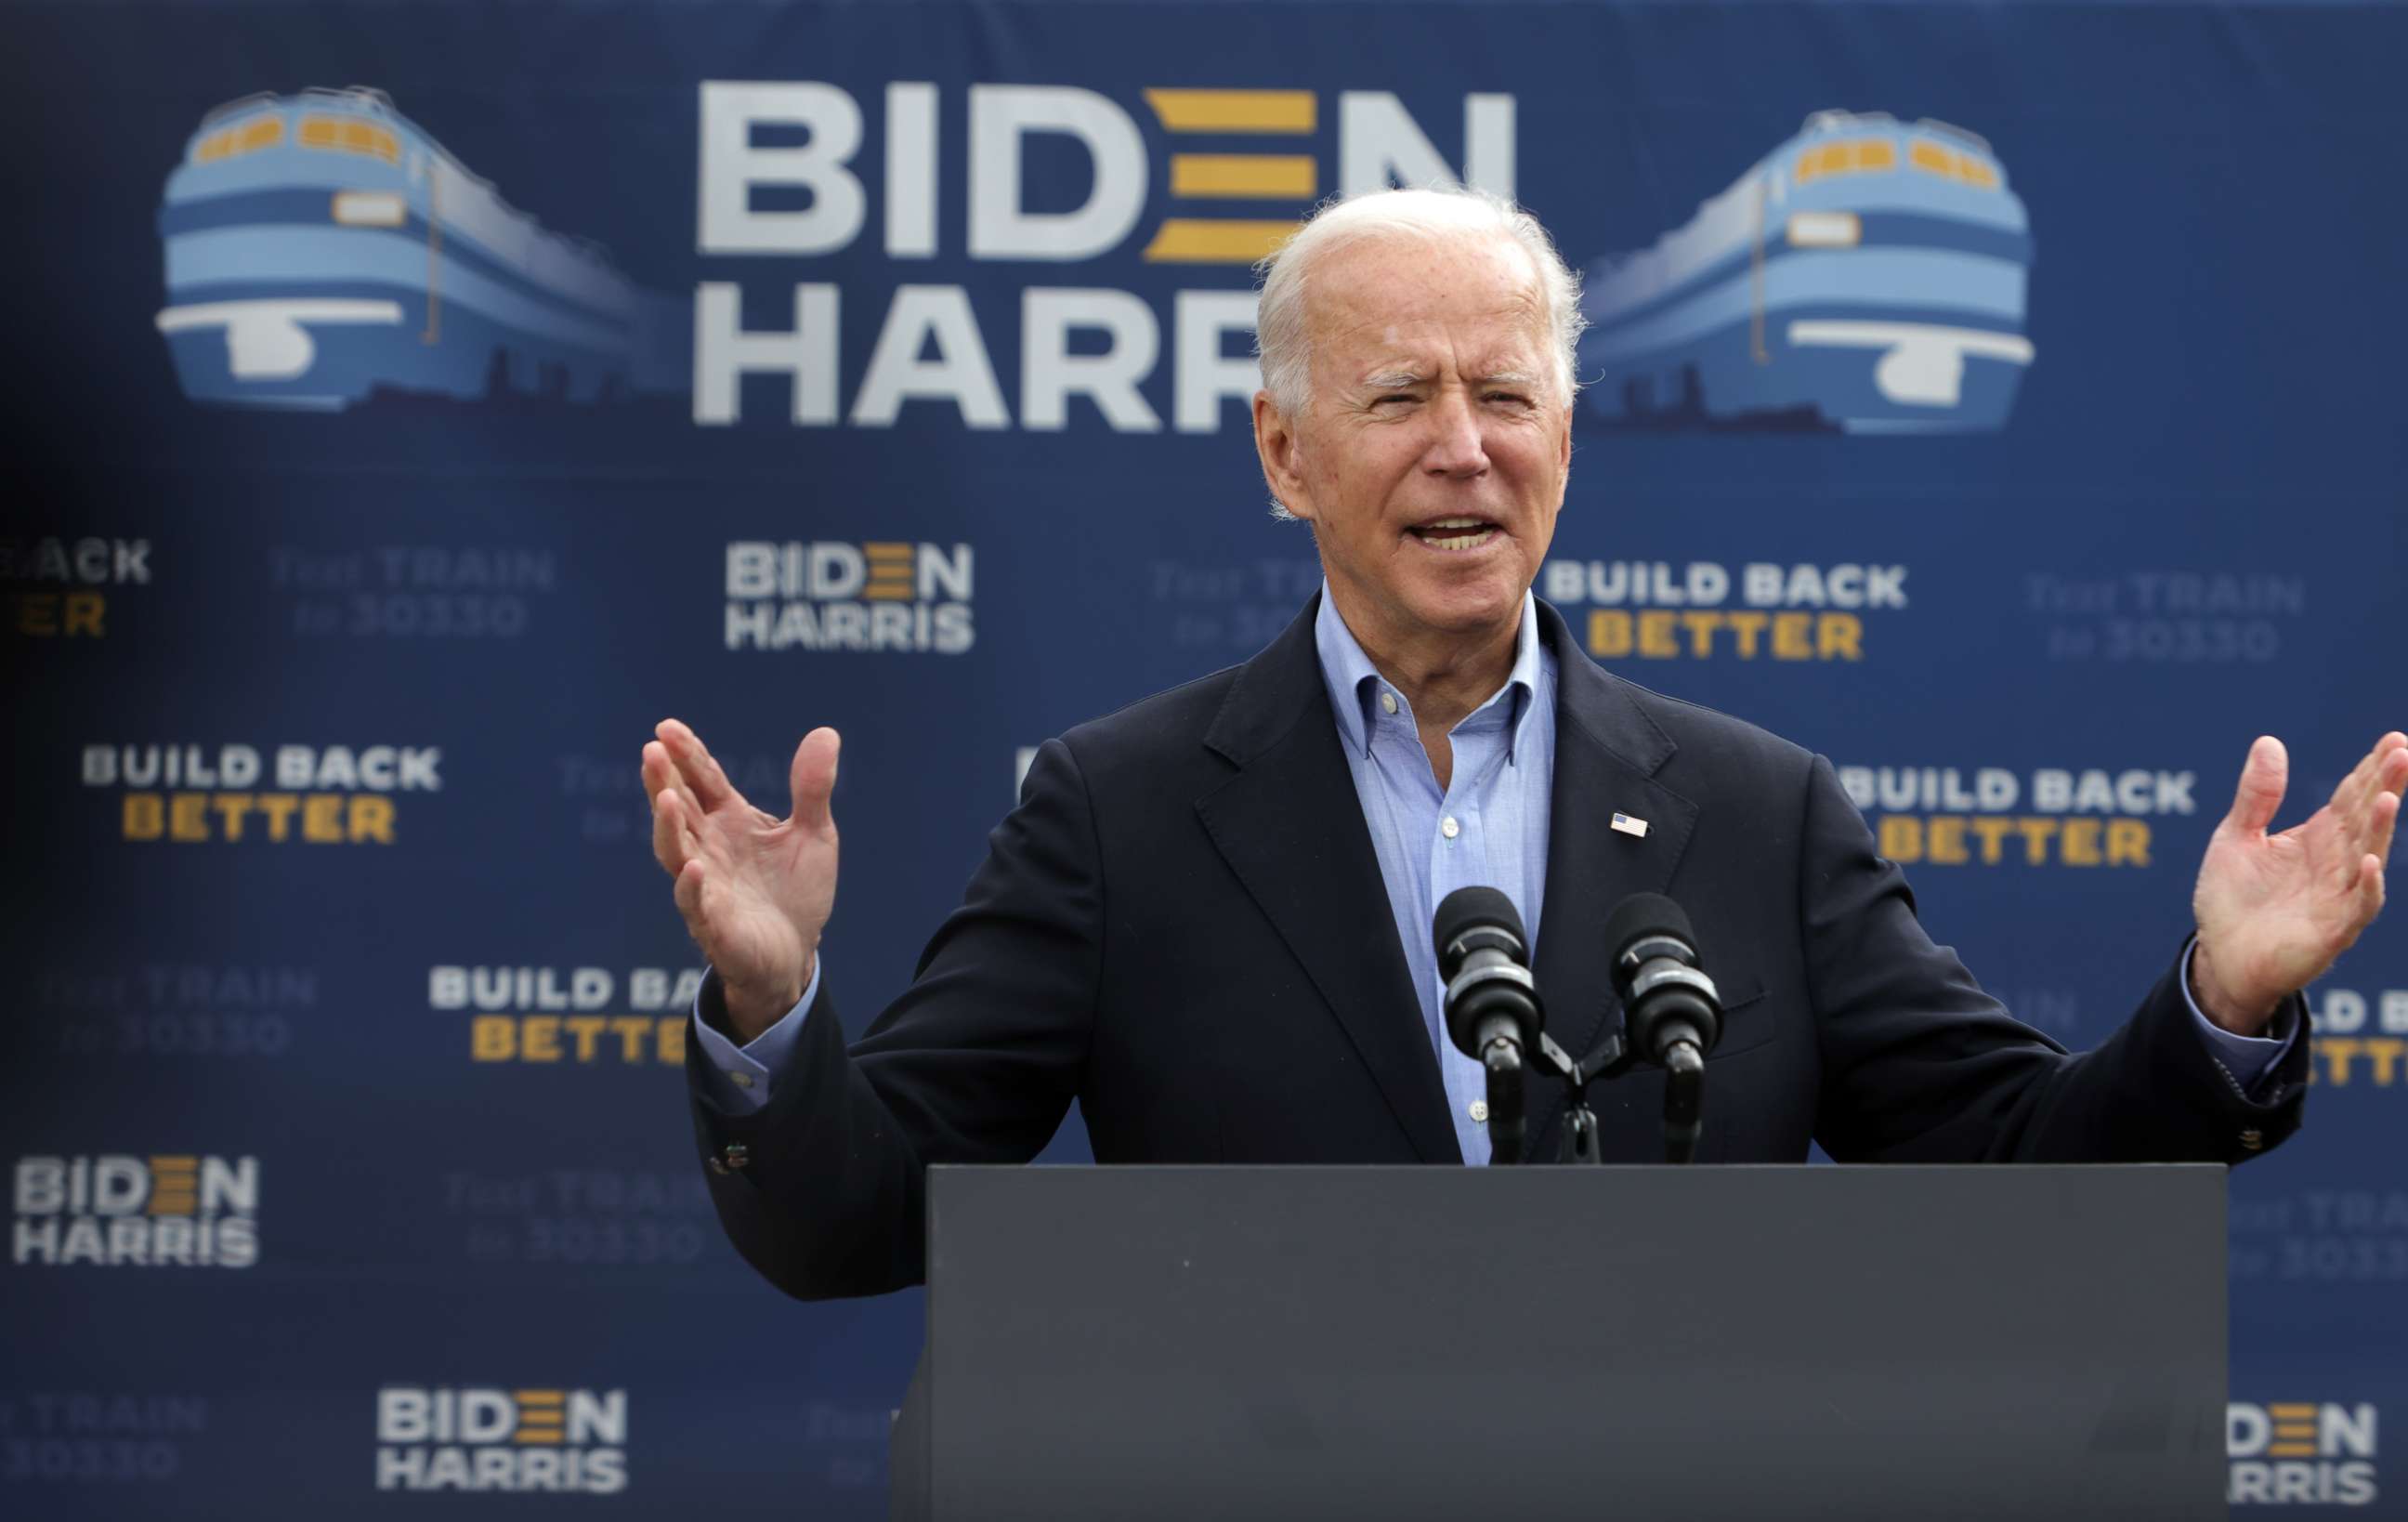 PHOTO: Democratic presidential nominee Joe Biden speaks before the launch of a train campaign tour at the Amtrak Station in Cleveland, Sept. 30, 2020.